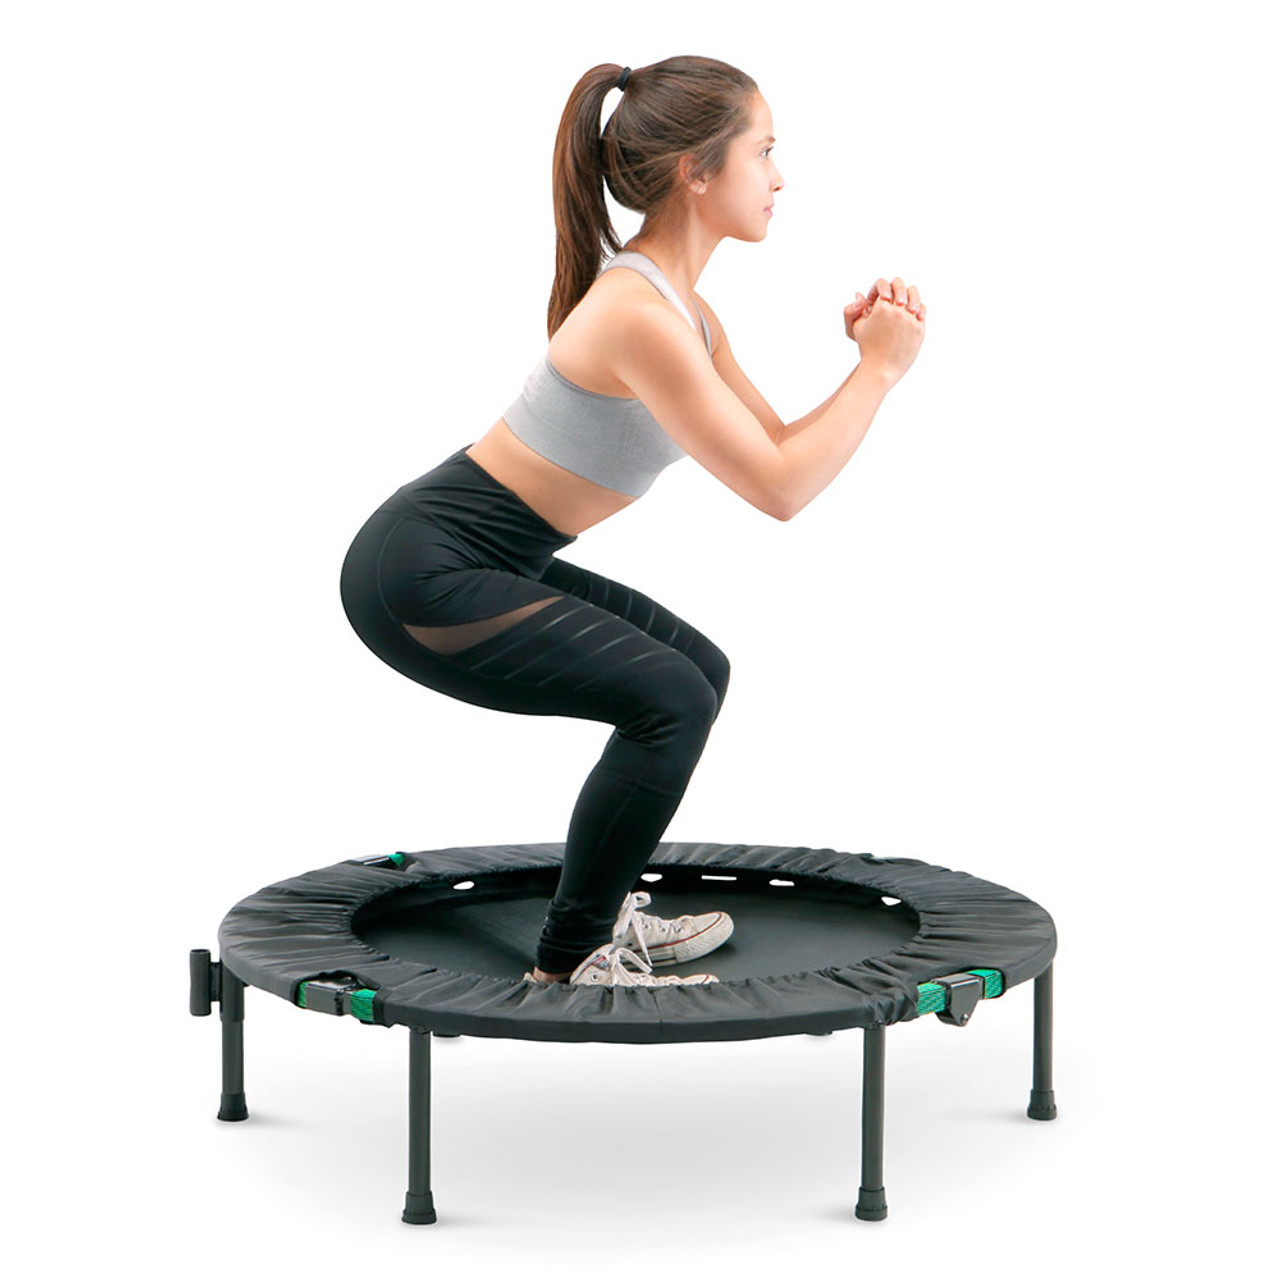 Cardio Trampoline Trainer | Marcy ASG-40 Quality Cardio Exercise Trampoline